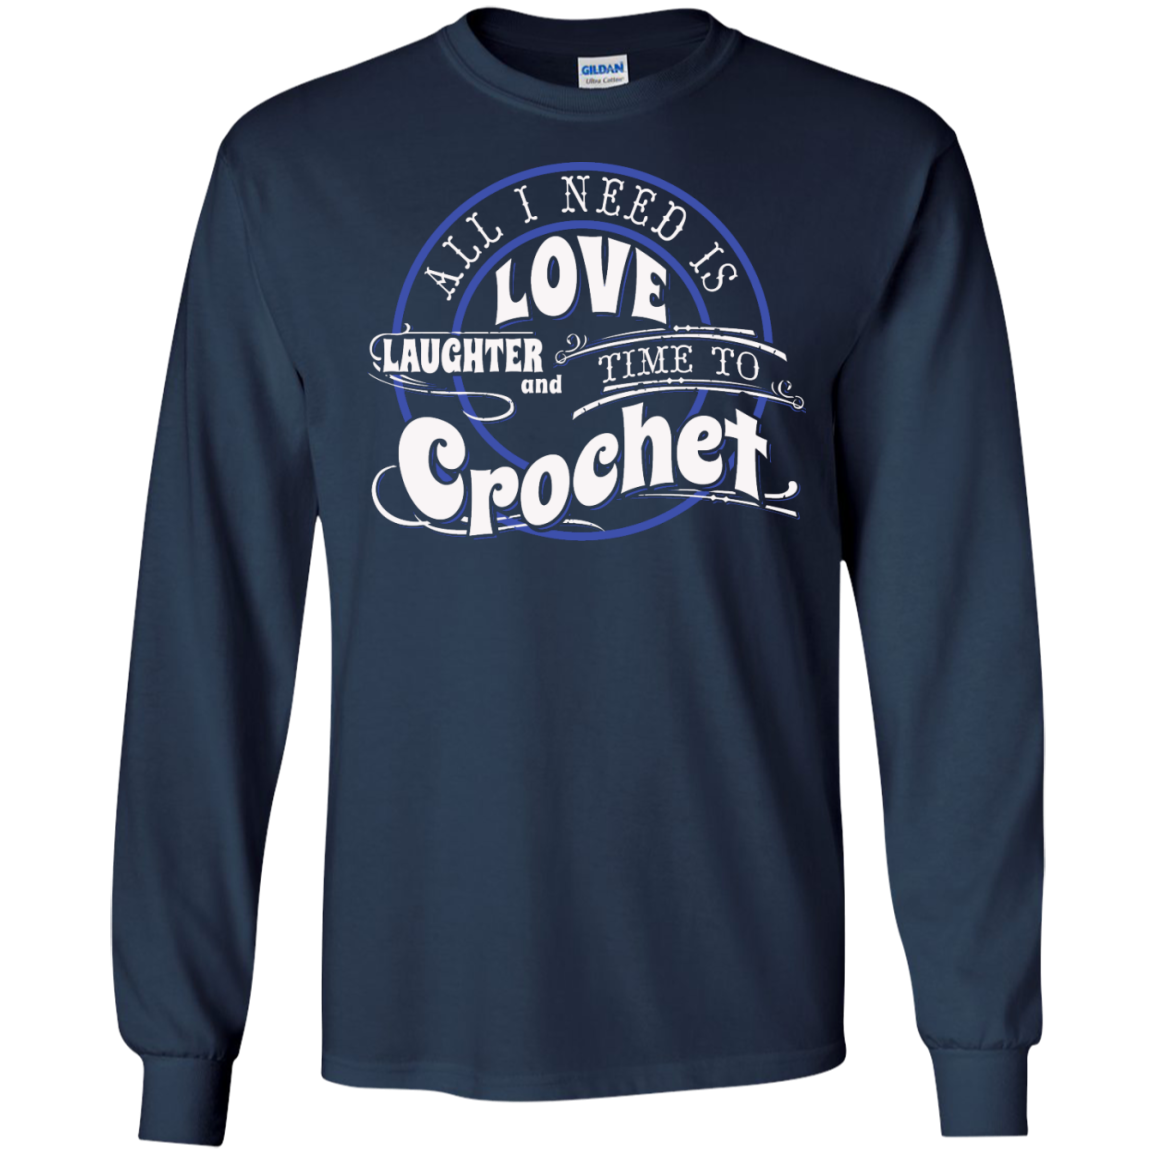 Time to Crochet Long Sleeve Ultra Cotton T-Shirt - Crafter4Life - 11